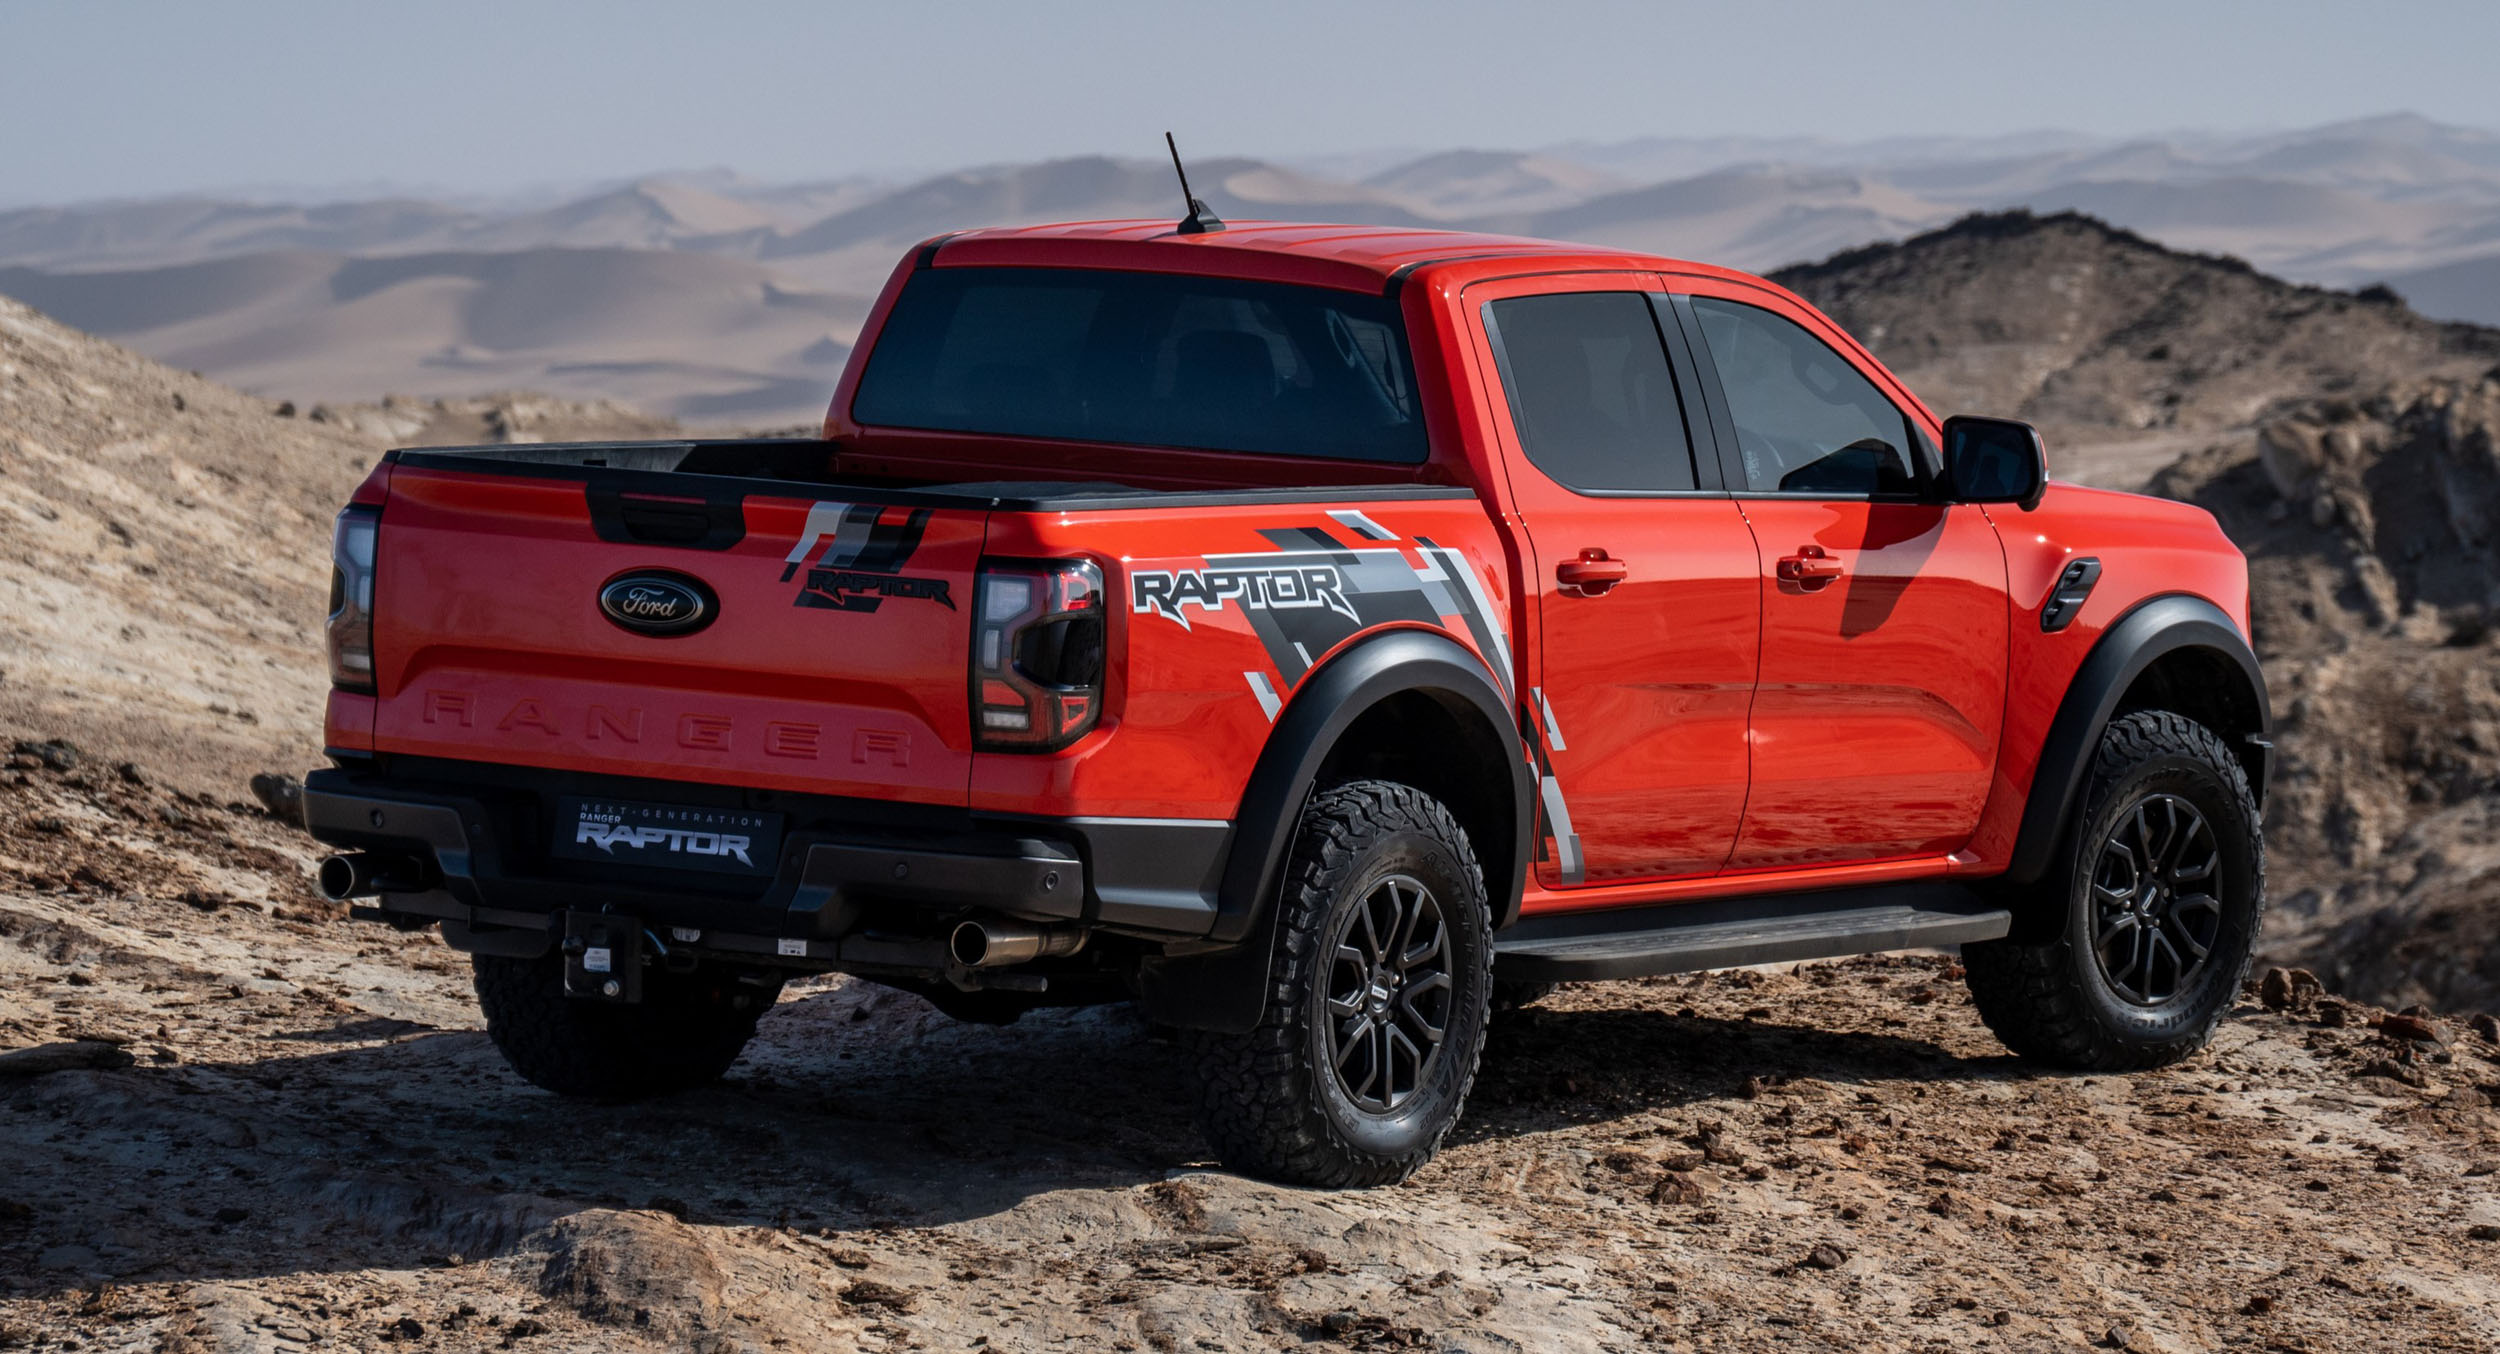 ford, ford f-150, ford ranger, ford ranger vs f-150 – what south africans are missing out on